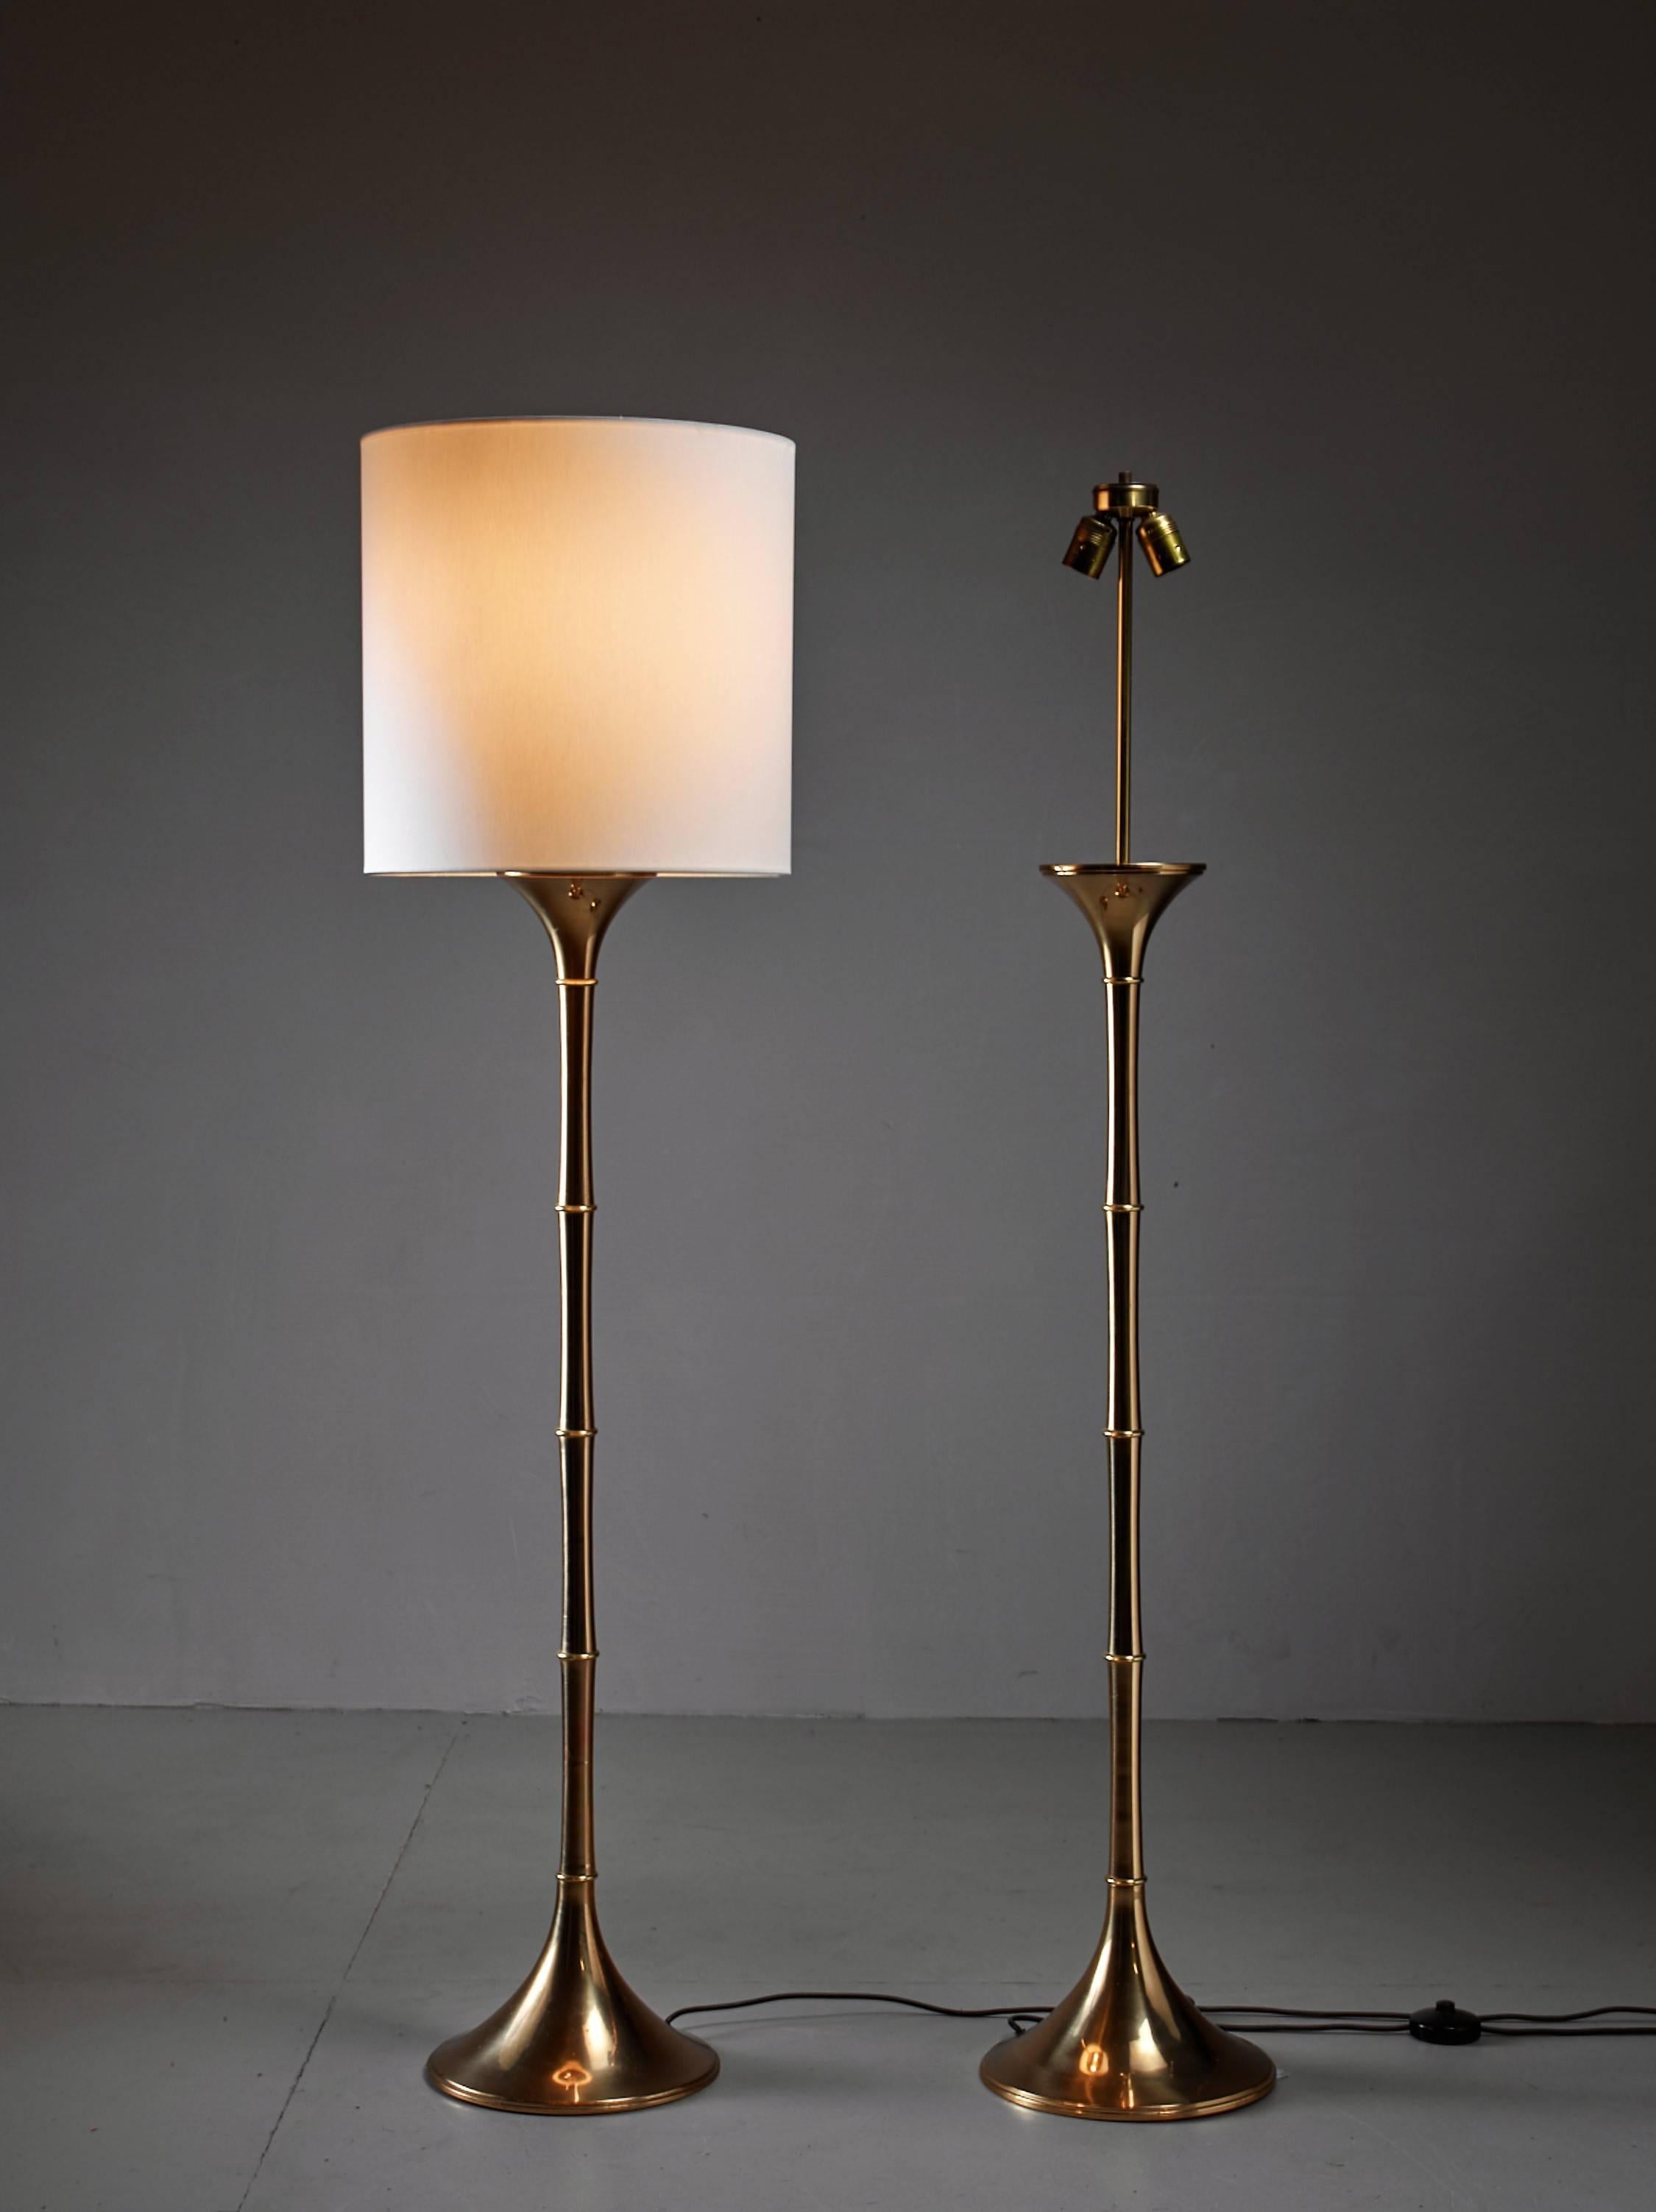 A pair of brass model 'Bamboo' floor lamps by German designer Ingo Maurer.

* This piece is offered to you by Bloomberry, Amsterdam *